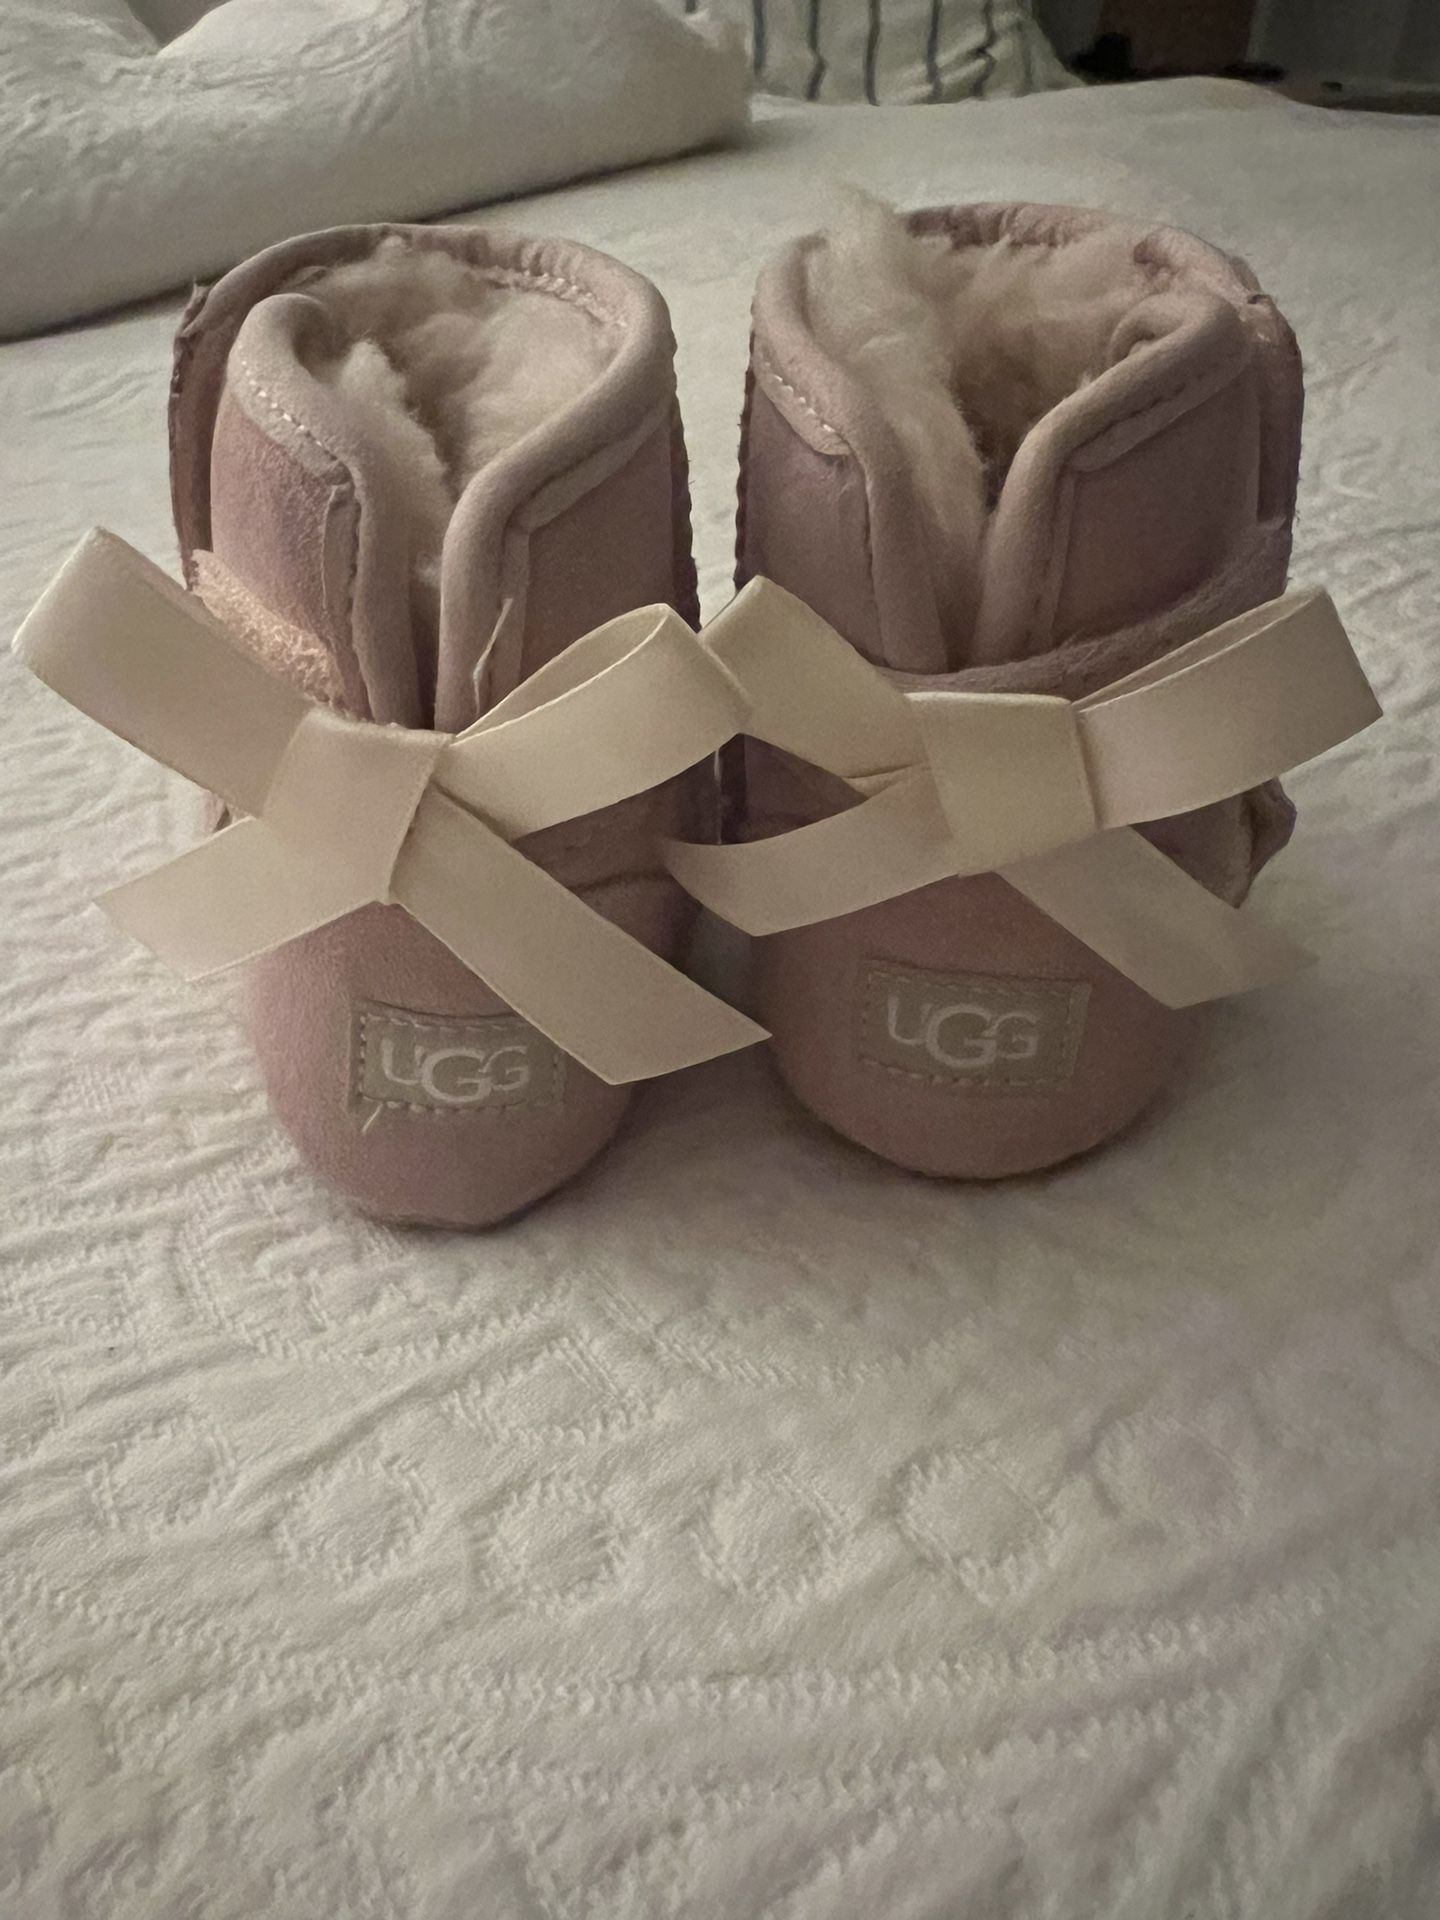 Infant Ugg Boots - Pink Suede With Bows 